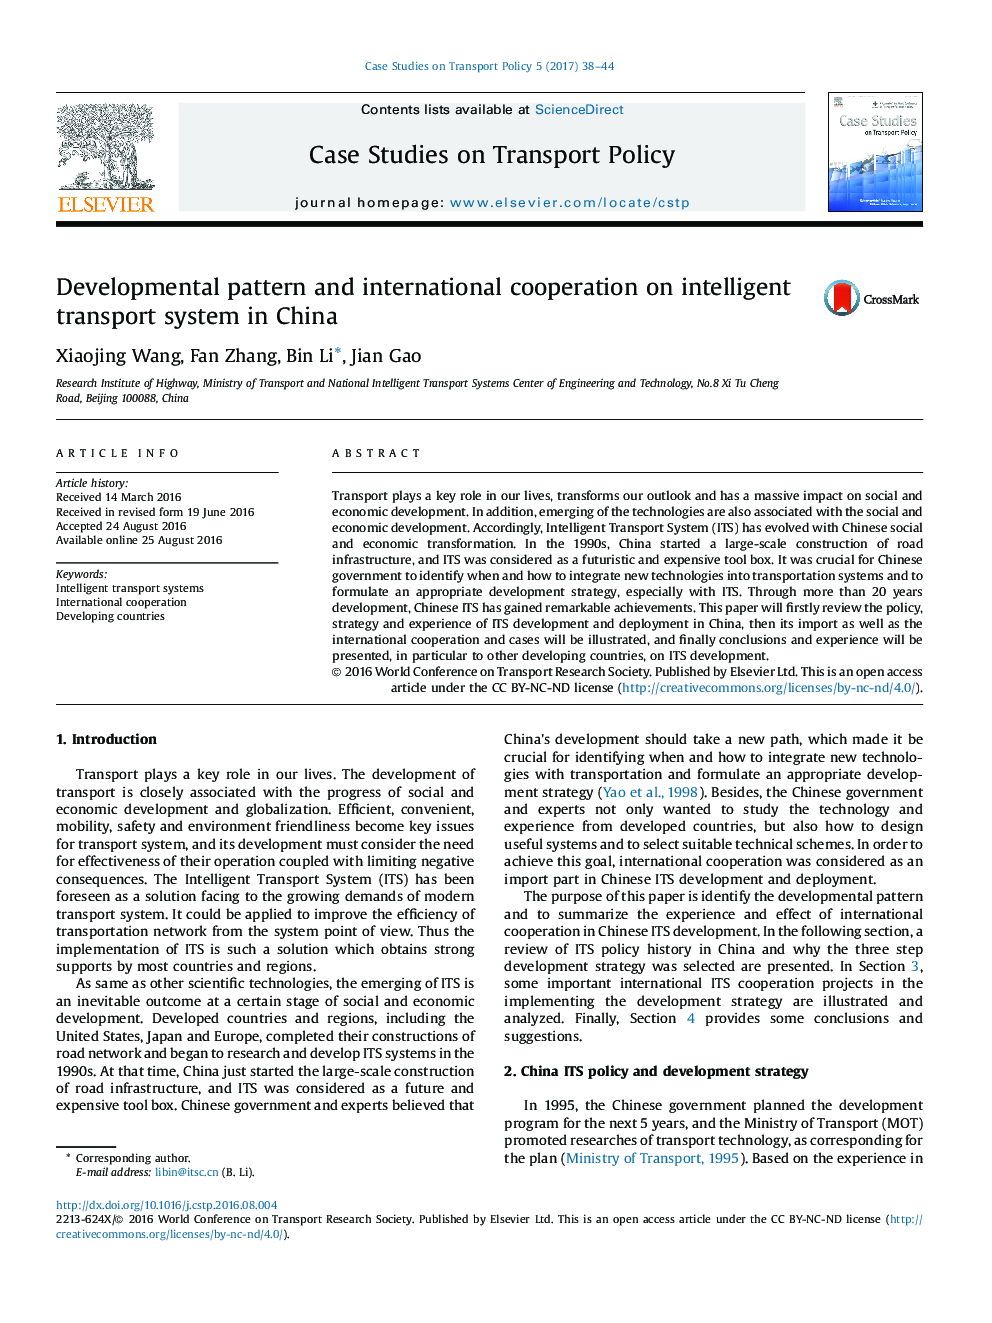 Developmental pattern and international cooperation on intelligent transport system in China